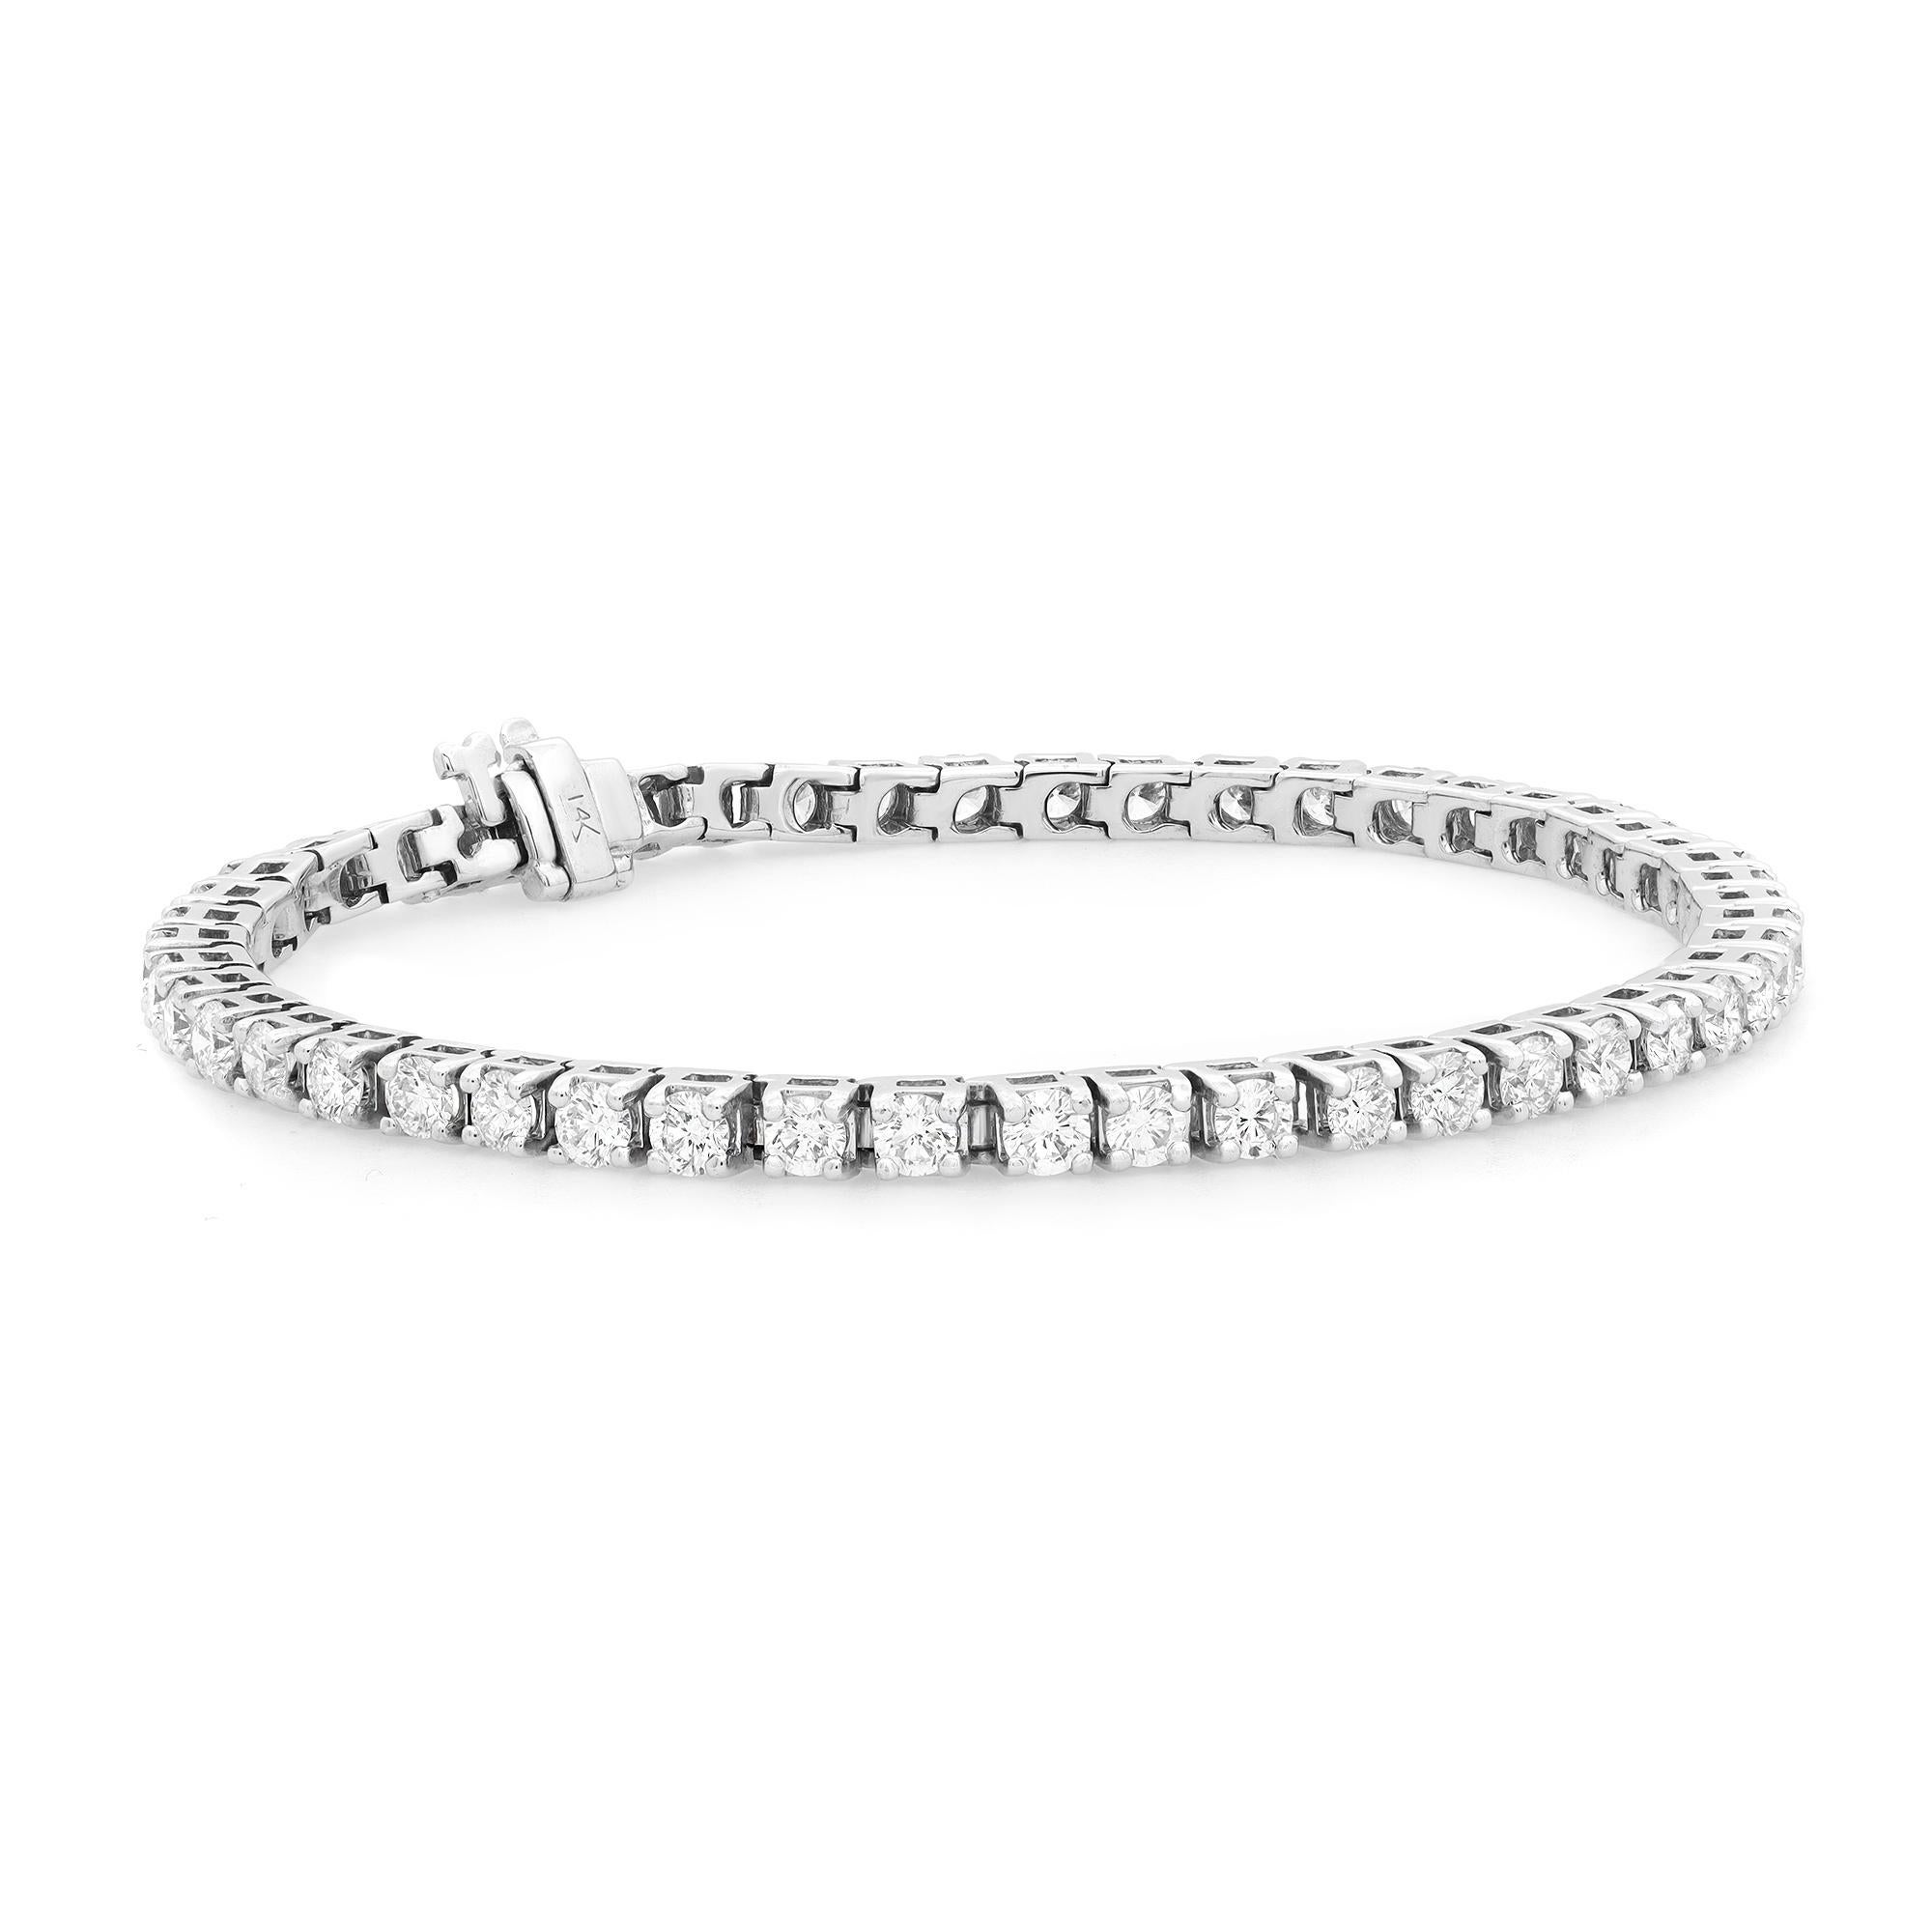 Classic yet elegant, this breathtaking tennis bracelet is crafted in 14K white gold with 50 prong set dazzling round brilliant cut diamonds. Total diamond weight: 5.00 carats with each diamond size 10pt. The bright white diamonds are H color and SI